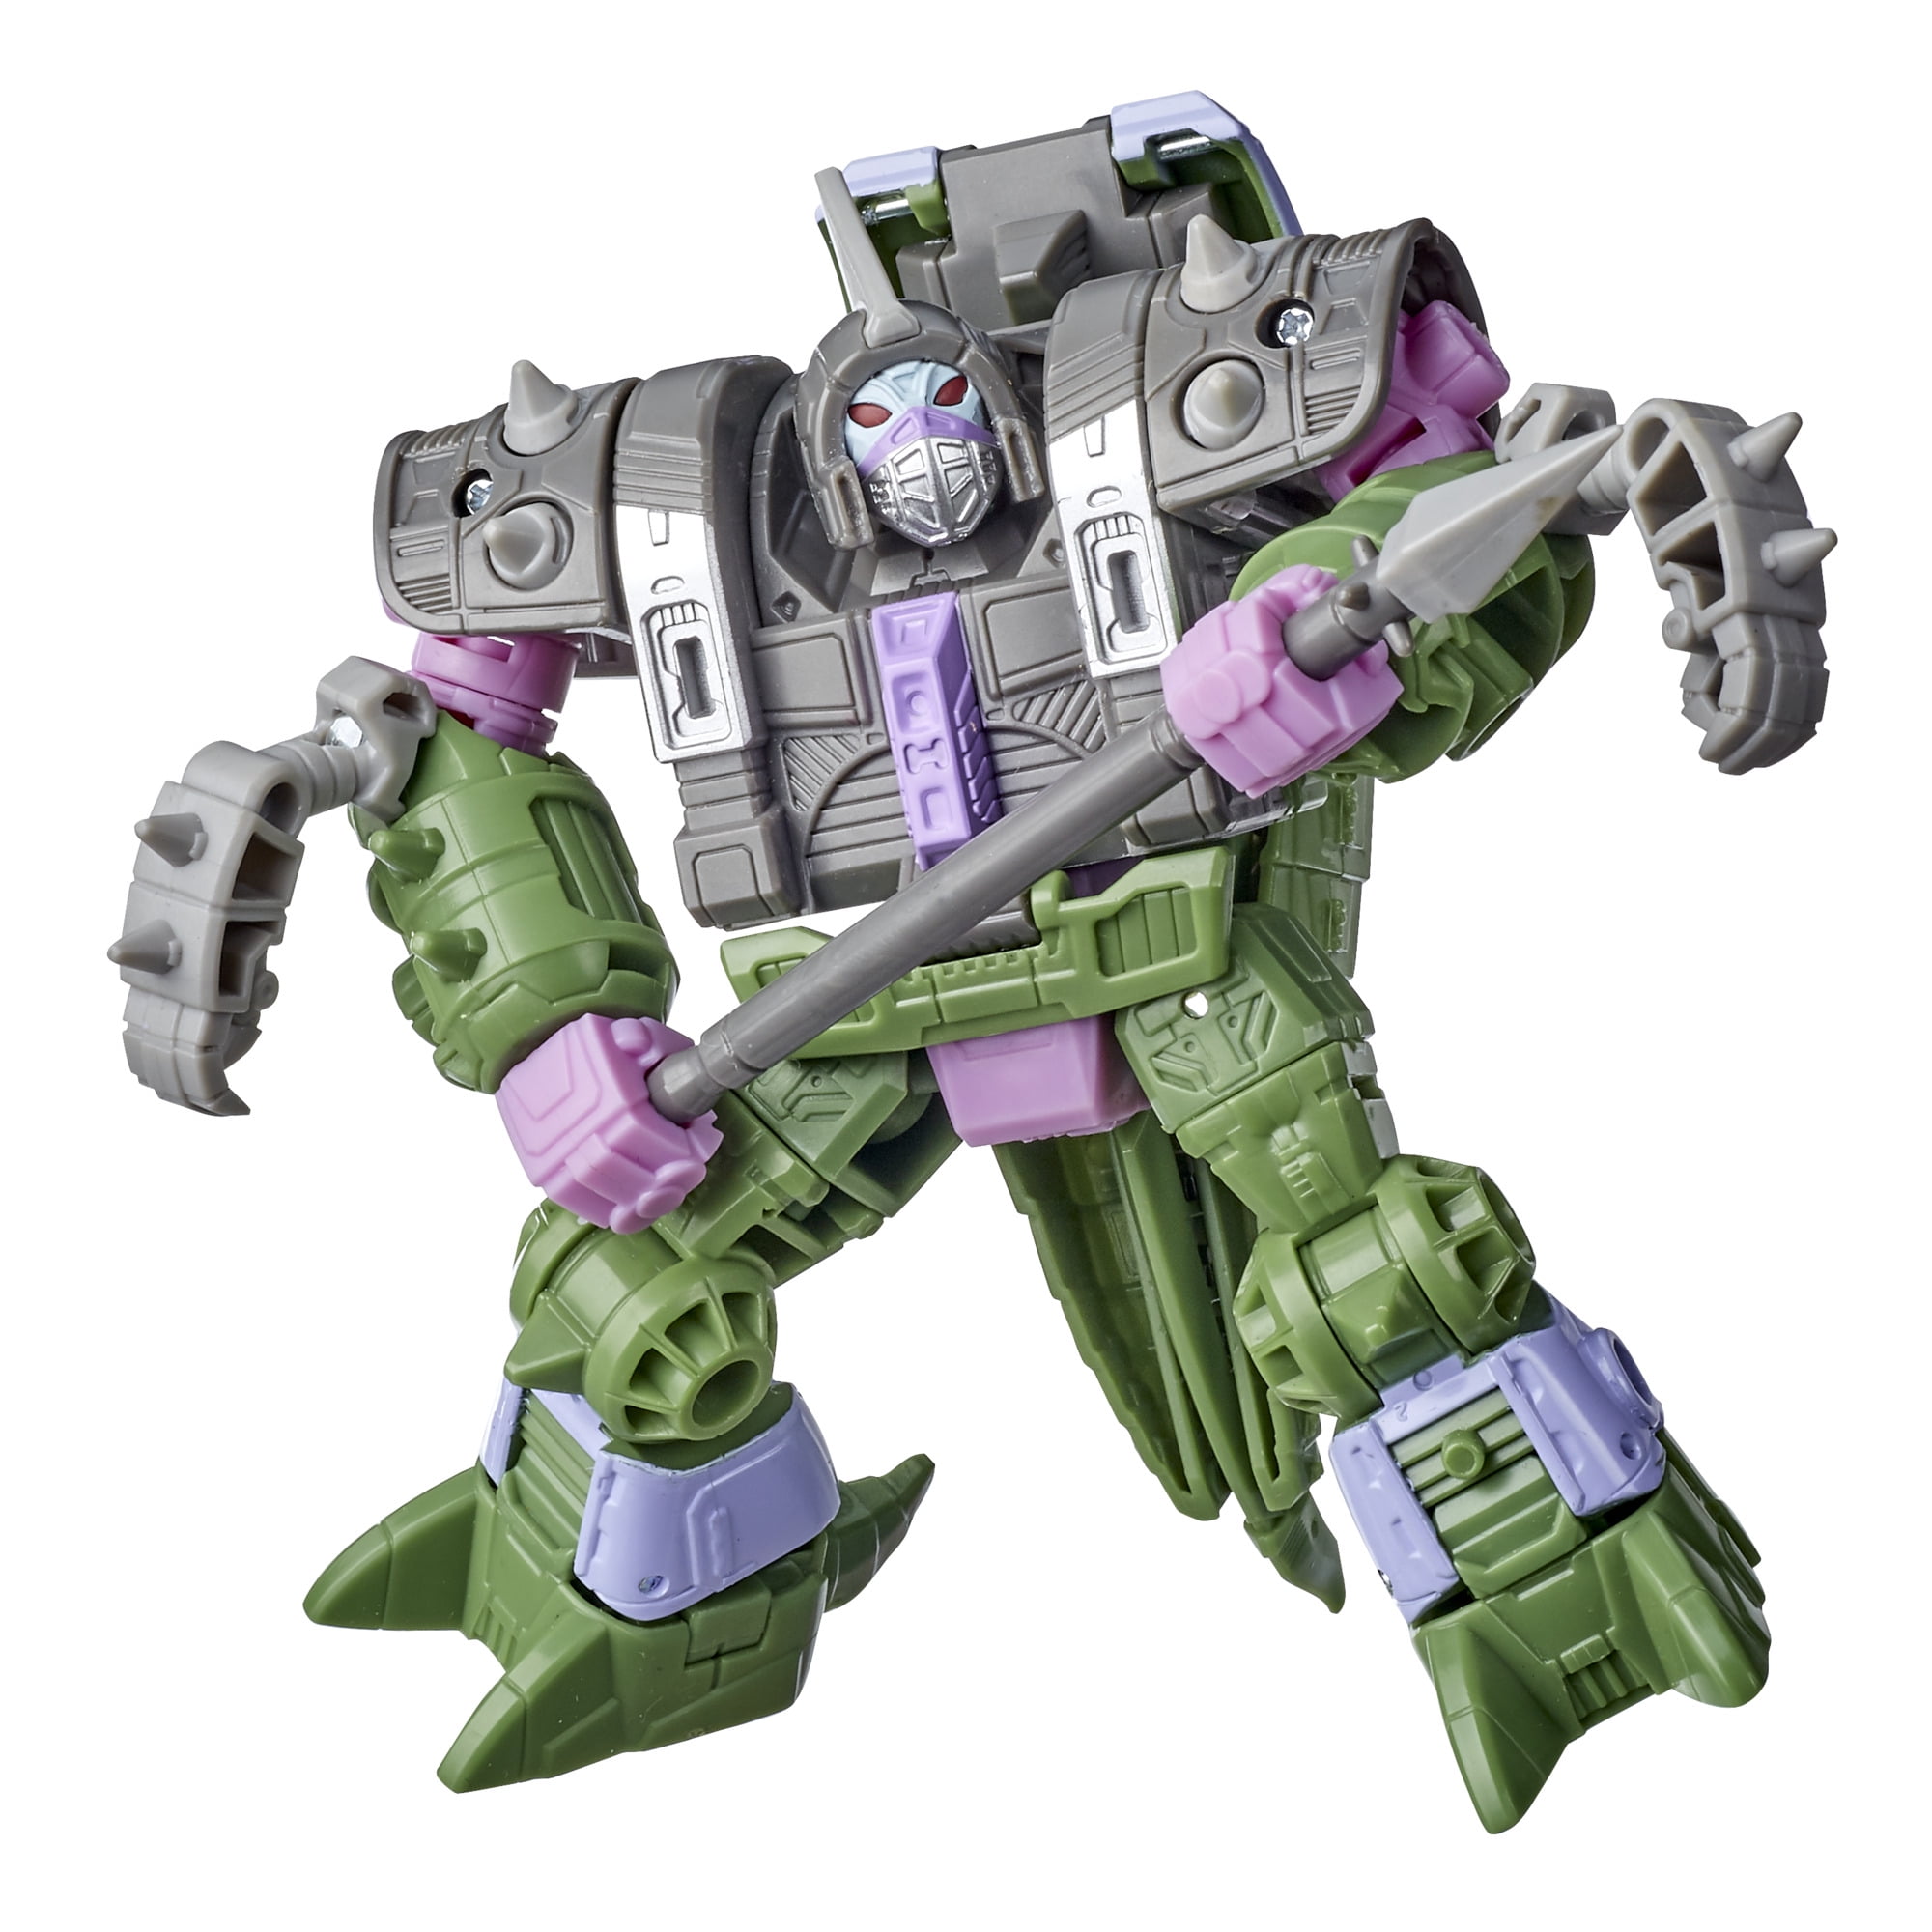 Autobot Grapple Action Figure for sale online Earthrise Deluxe Hasbro Transformers War for Cybertron 